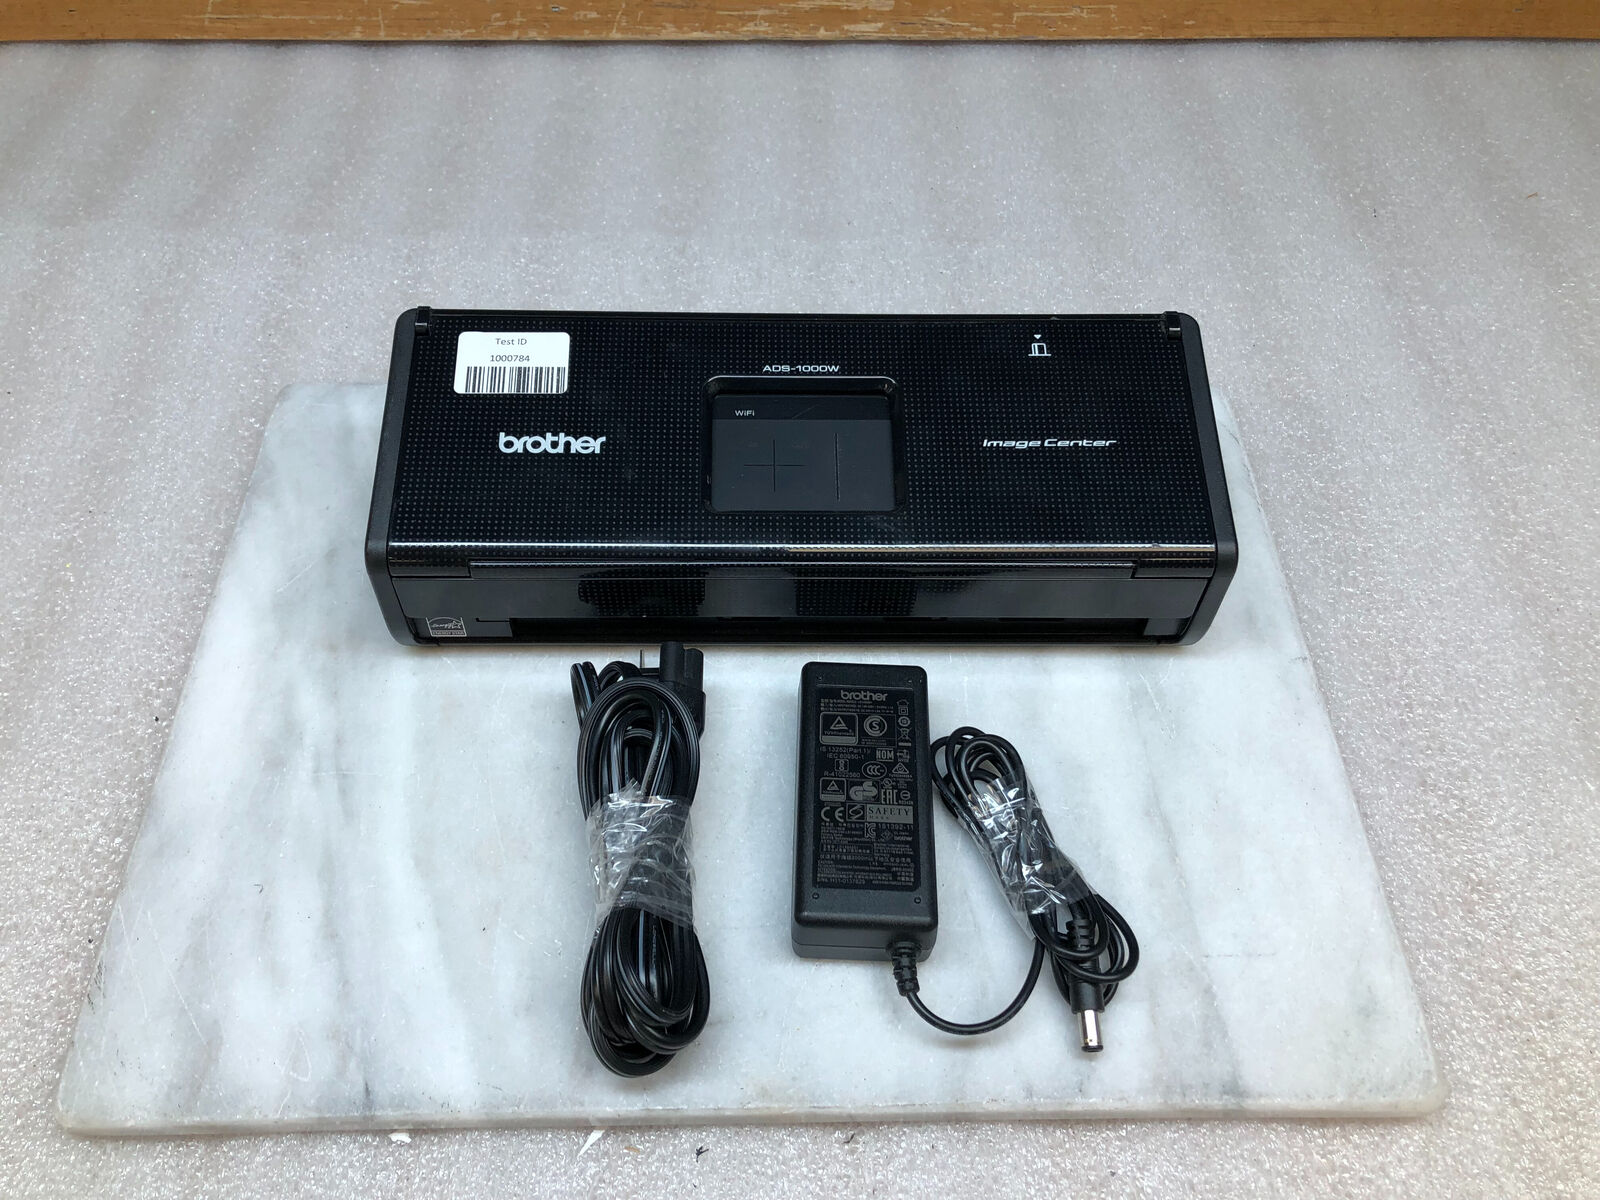 Brother ADS-1000W Wireless USB Color Compact Desktop Scanner W/Power Cable